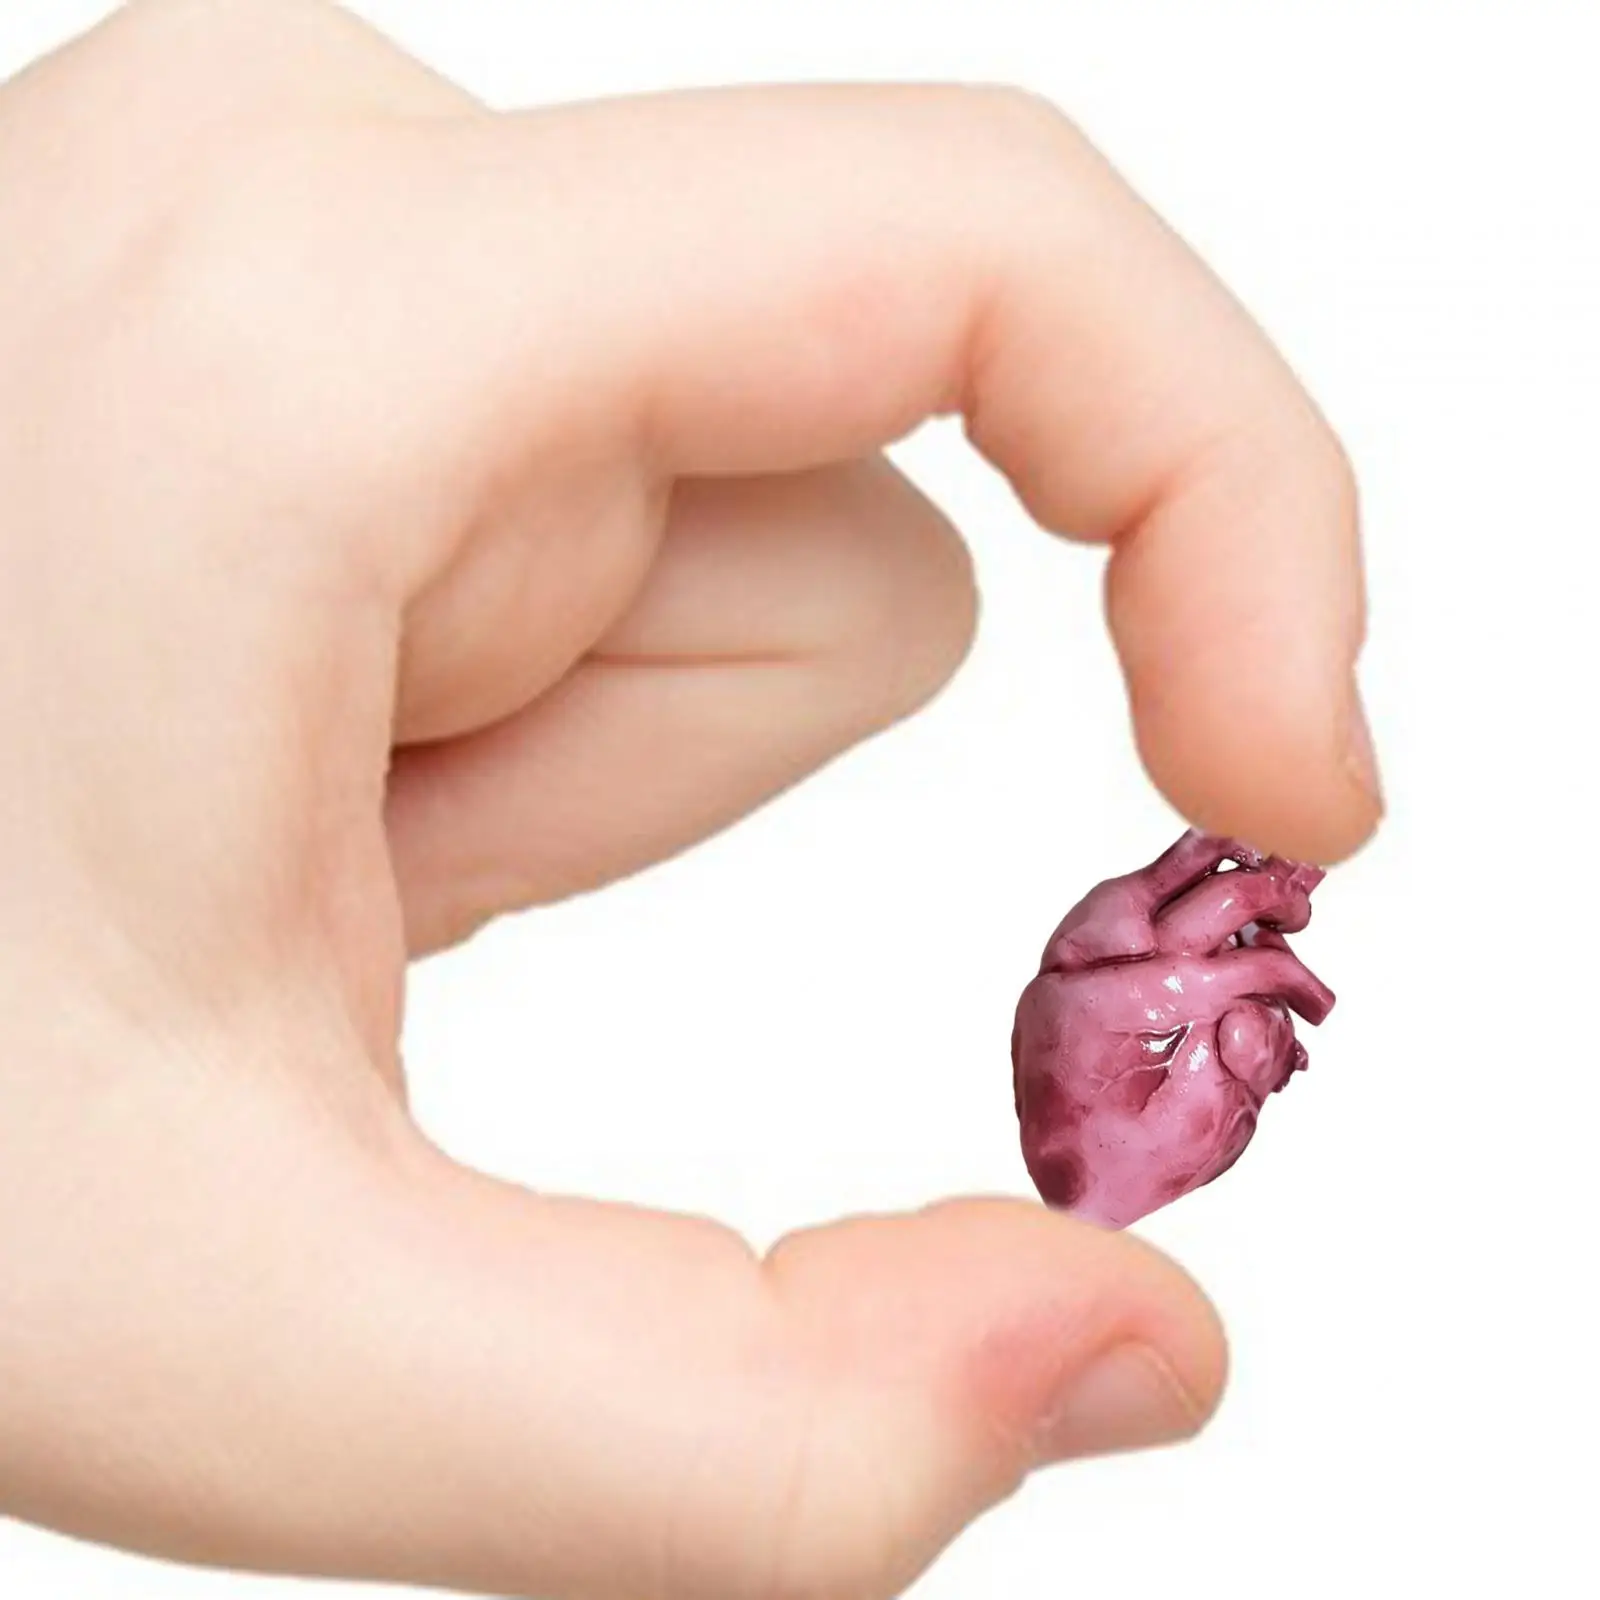 1/18 Scale Resin Heart Model Gift for Kids Adults Multi Purpose Ornament